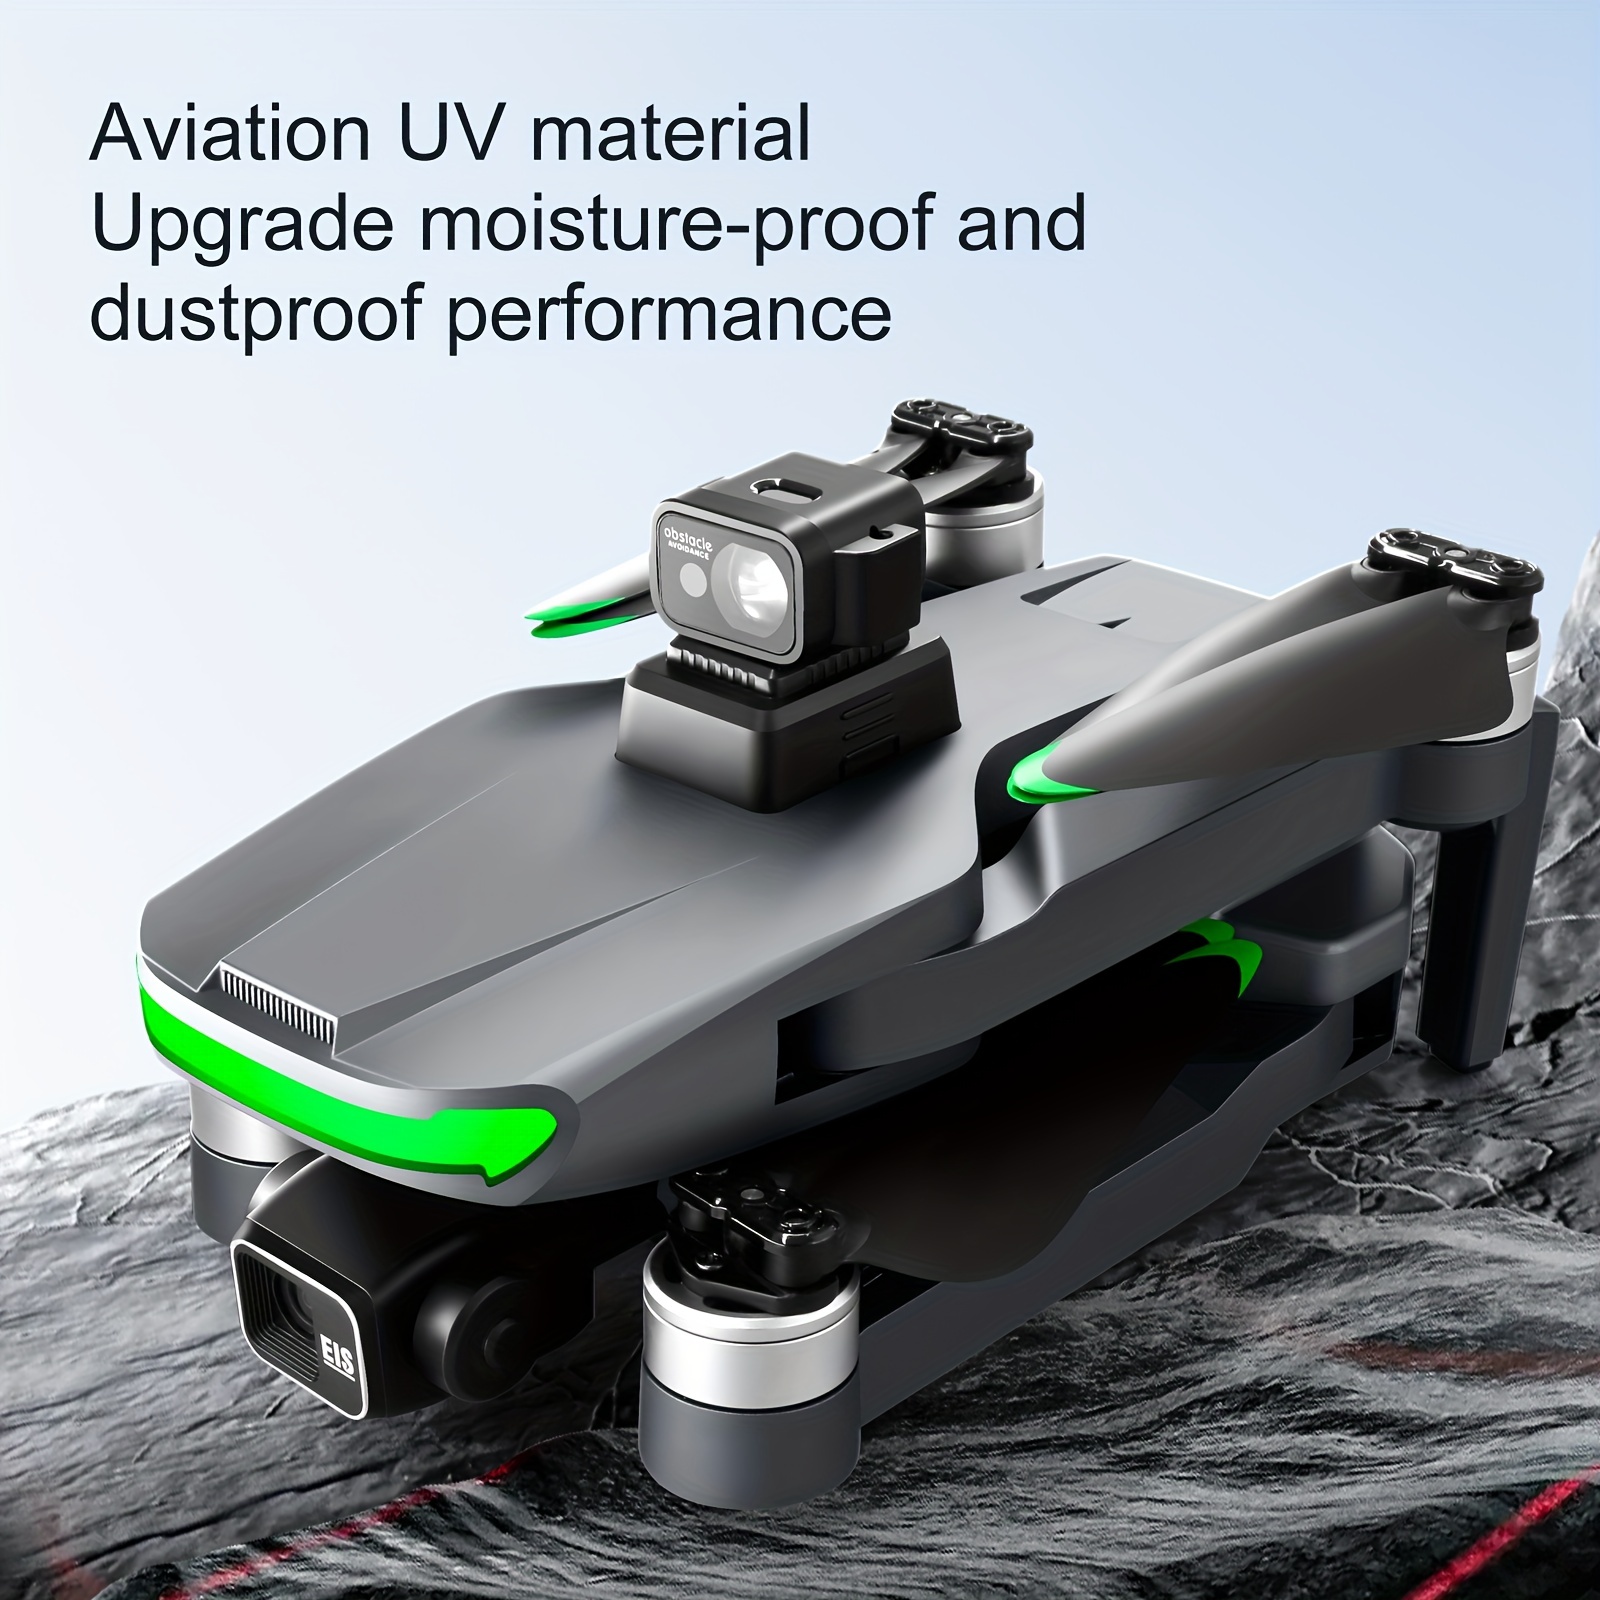 drone with 2k hdcamera news155 pro fessional quadcopter with brushless motor 500g payload and intelligent obstacle avoidance the perfect toy gift for adults kids and teenager stuff details 2